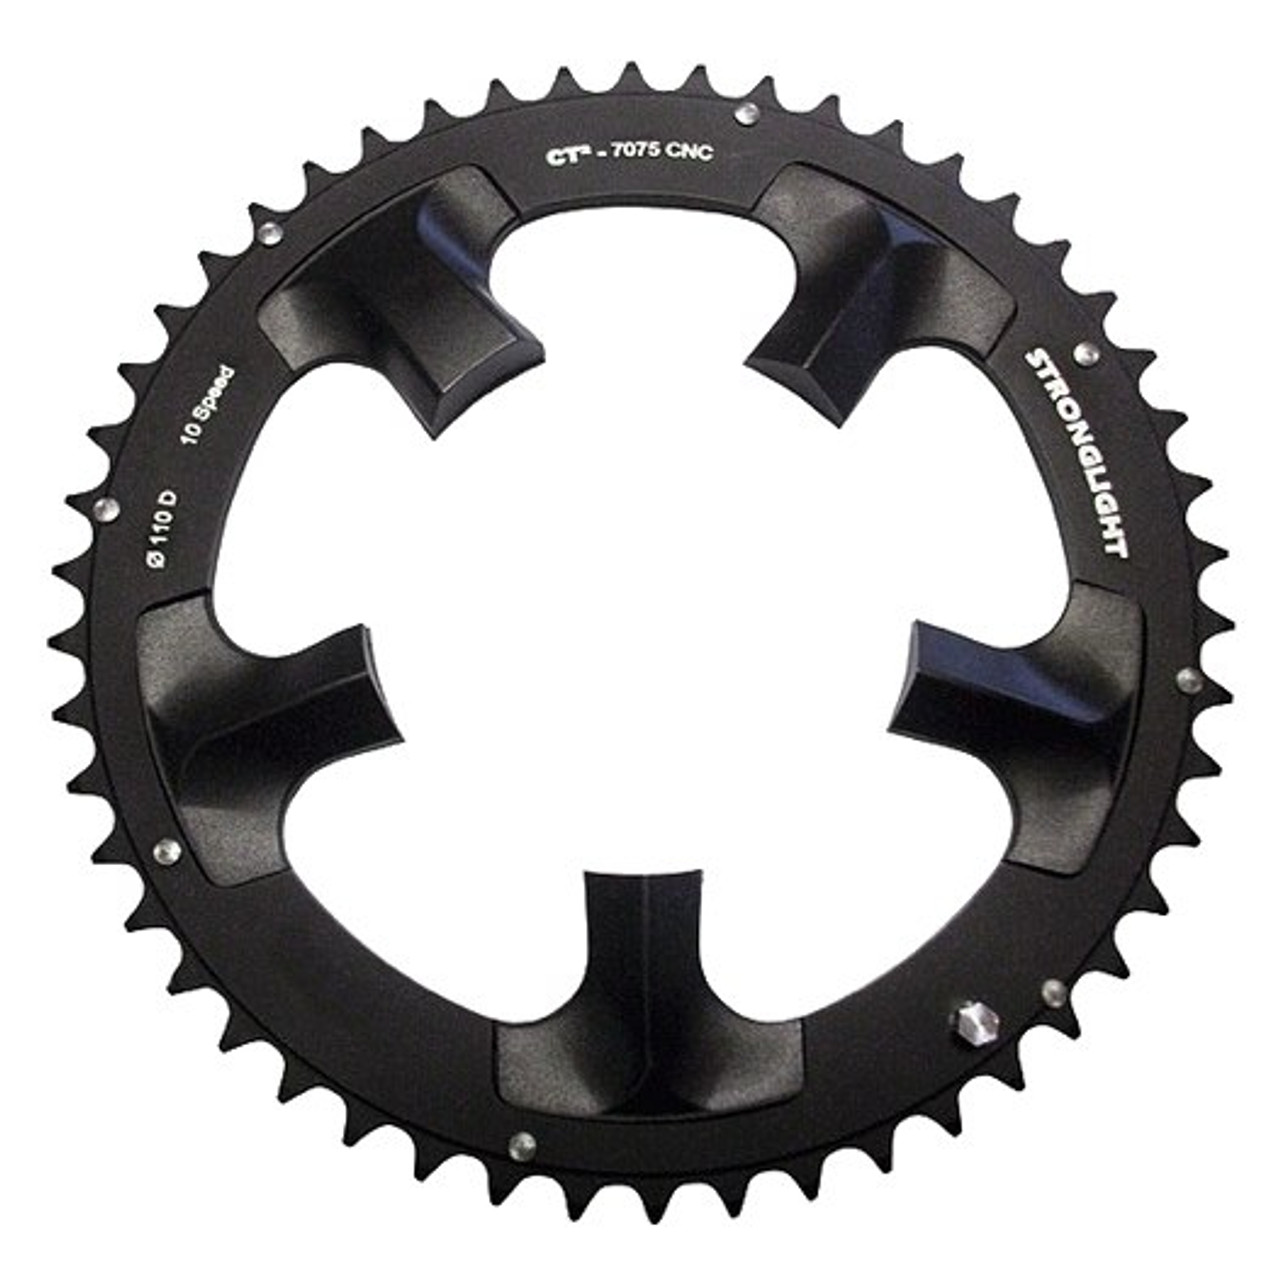 shimano ultegra 6750 compact 10sp chainset